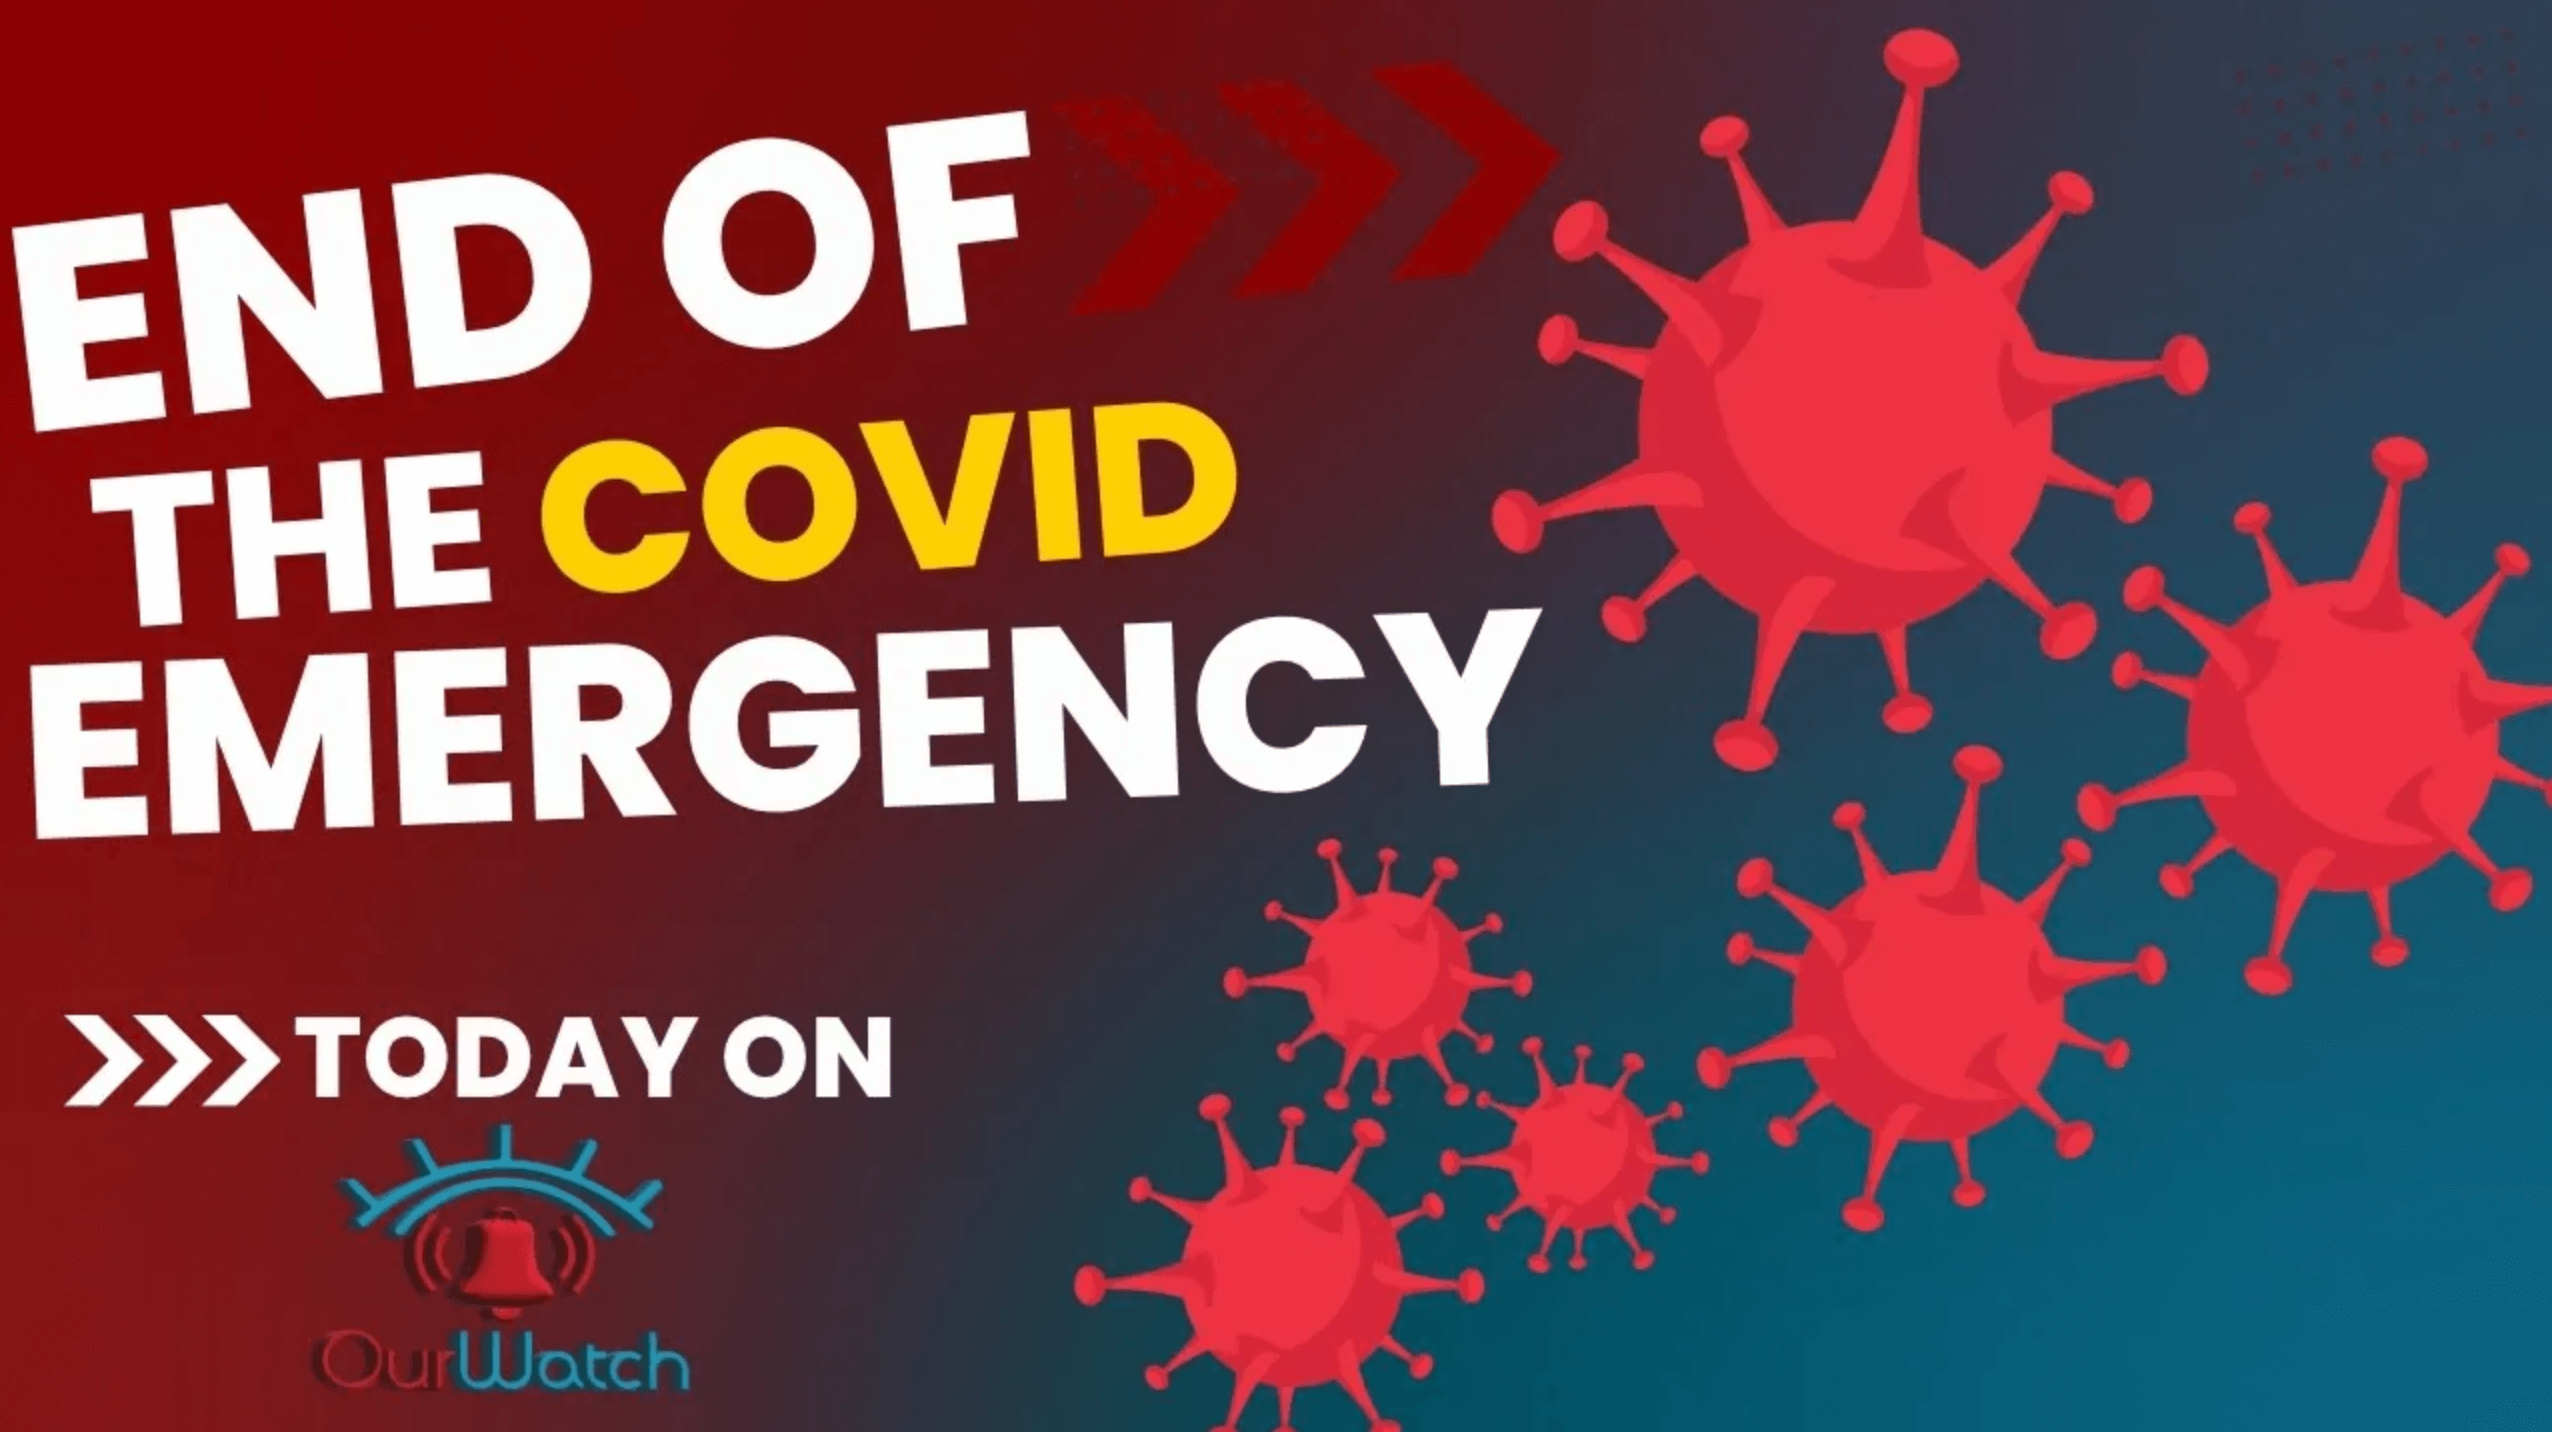 End of the Covid EMERGENCY! Will there be another one?